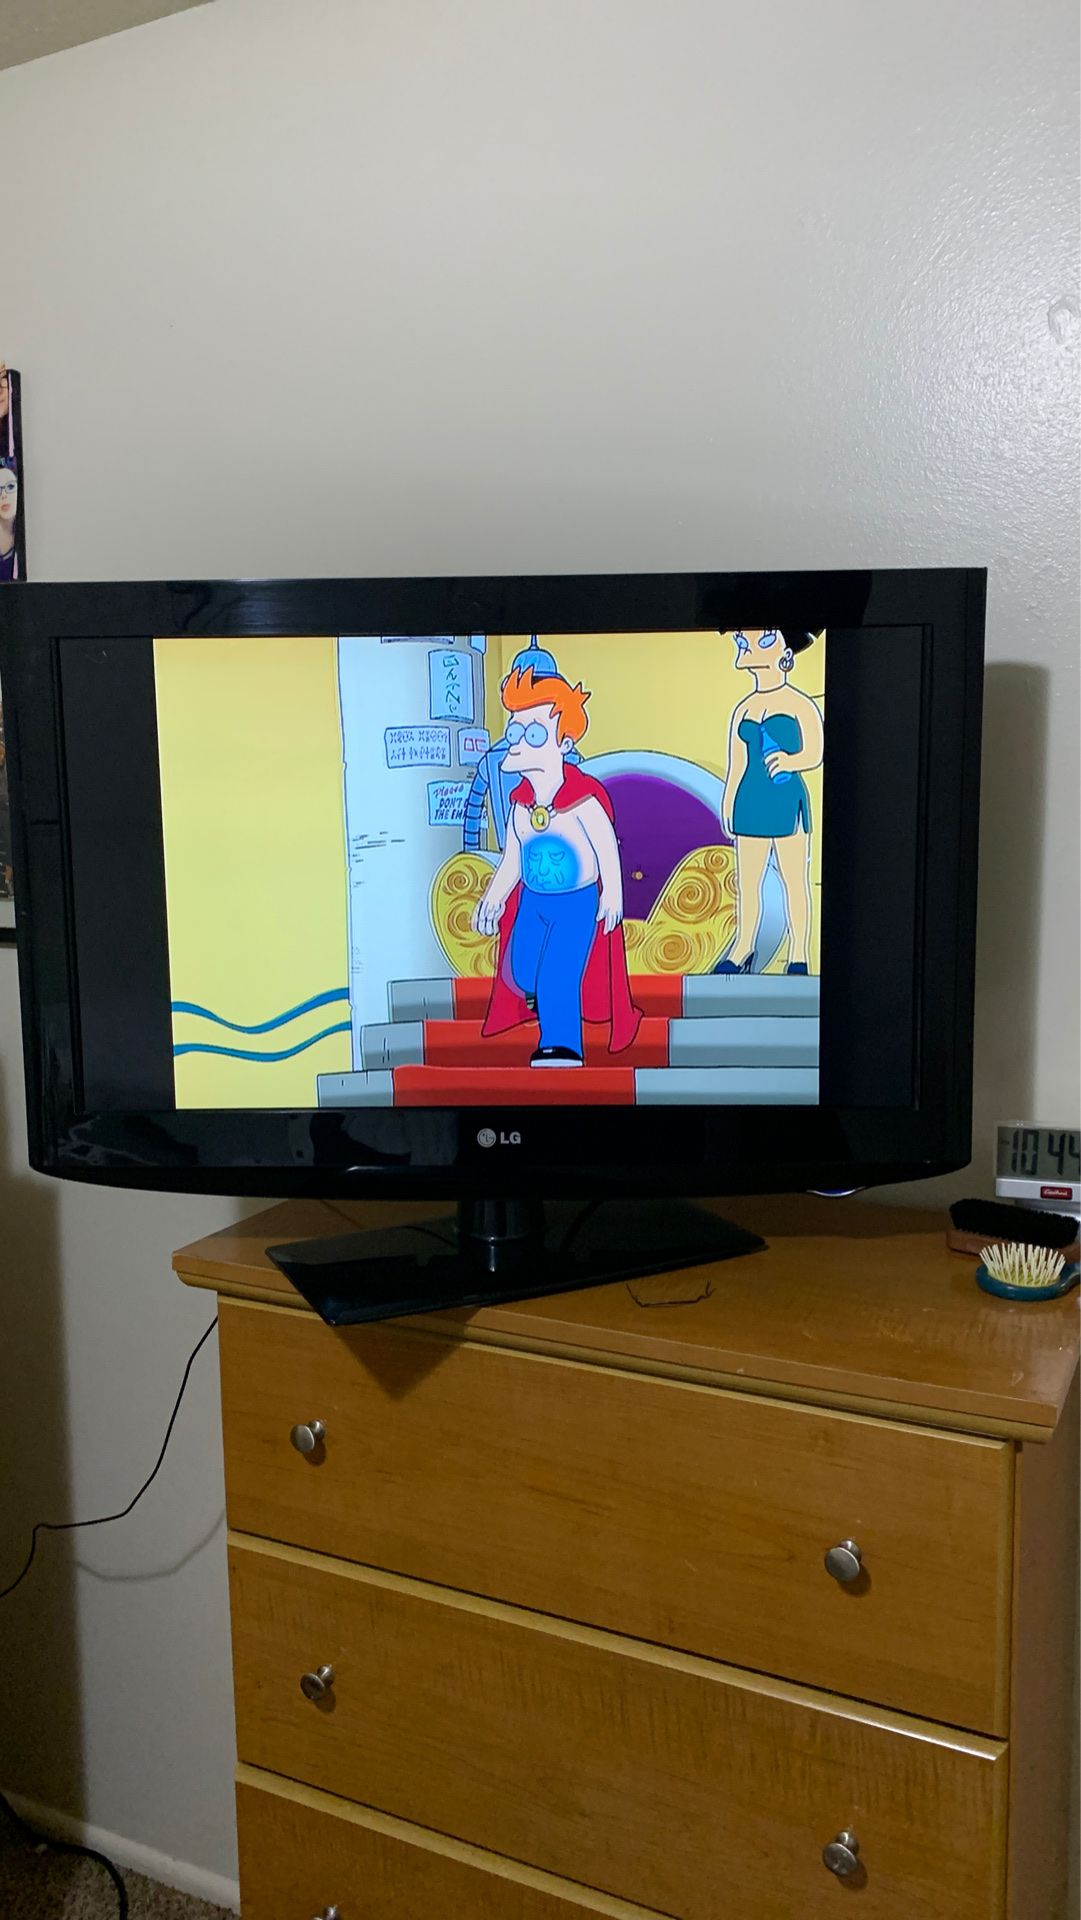 FREE 32” LCD TV (NO AUDIO) *pick up pending*